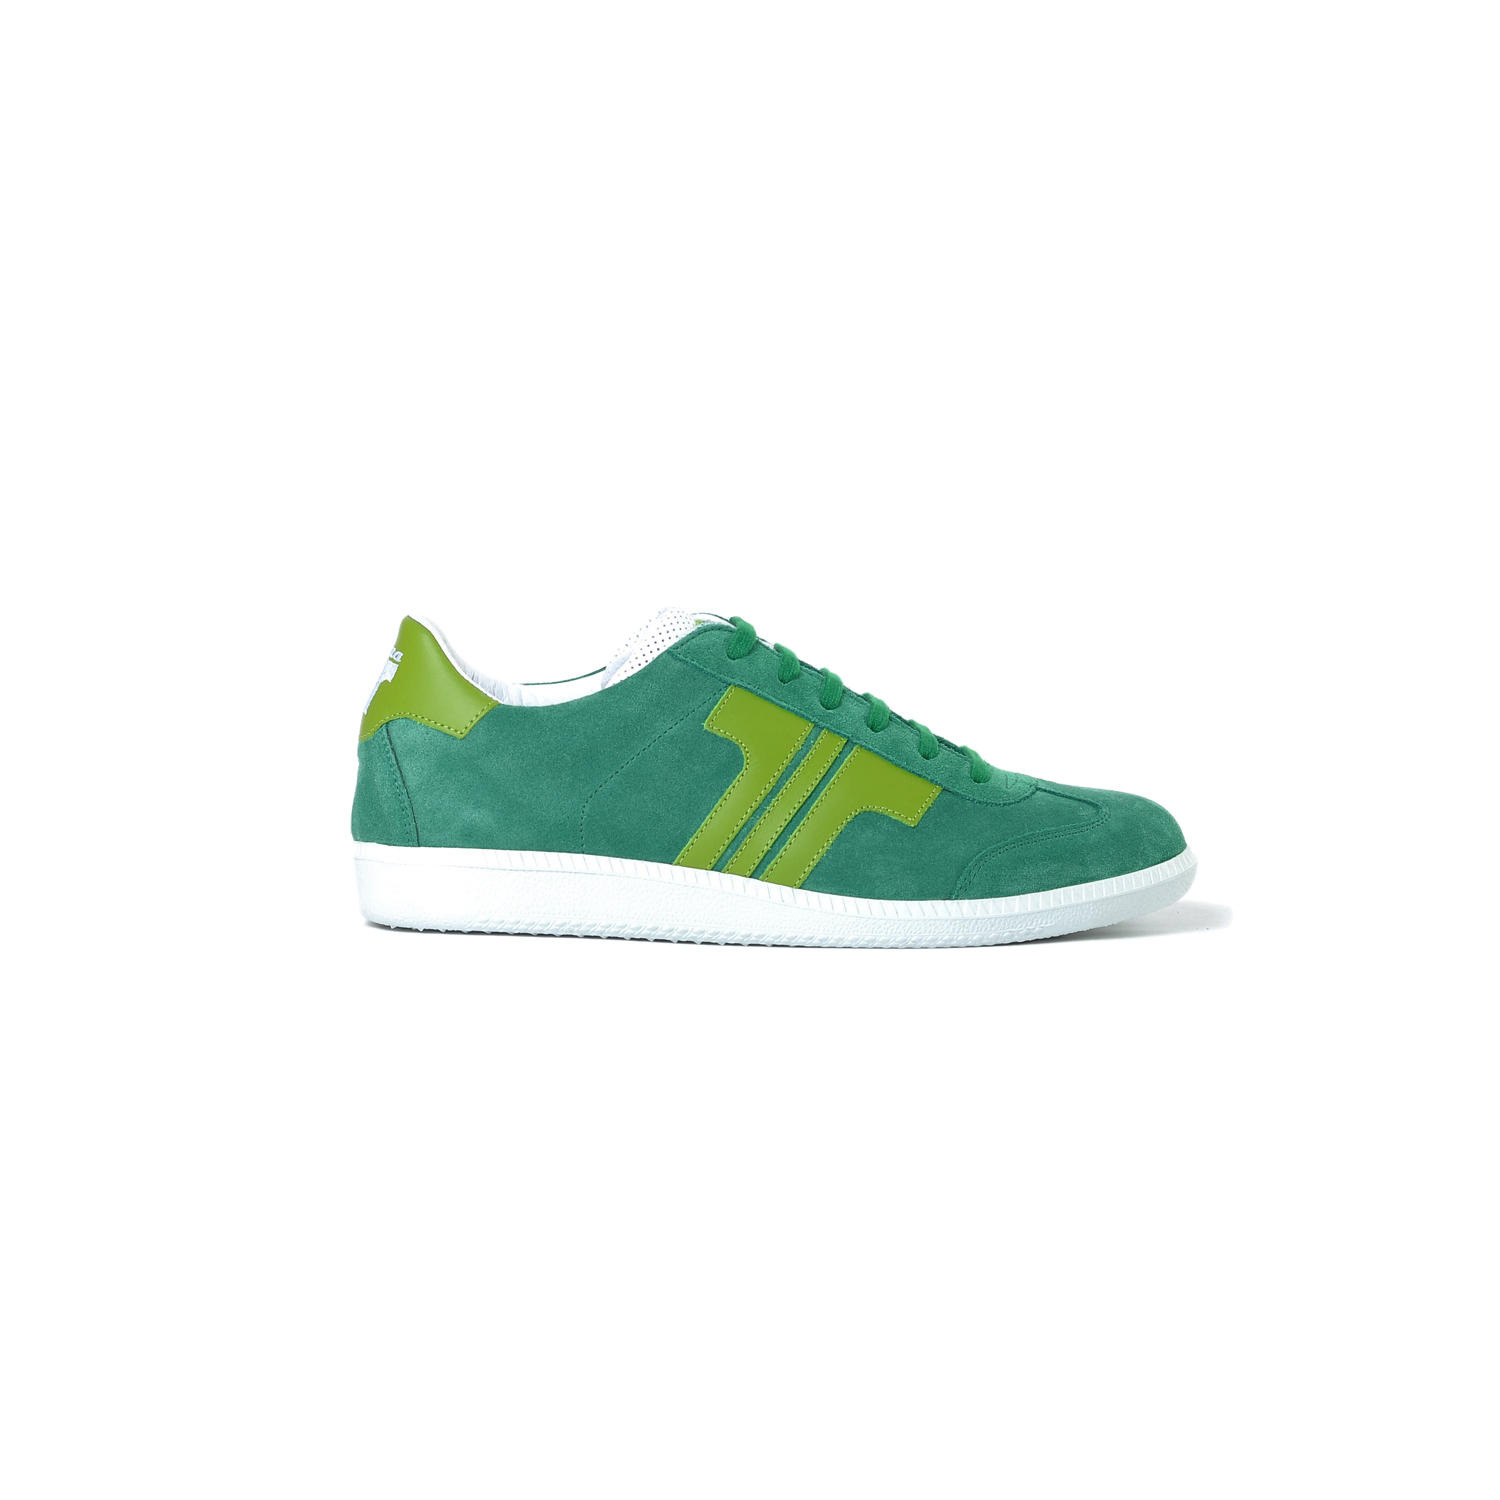 Tisza shoes - Comfort - Green-lime